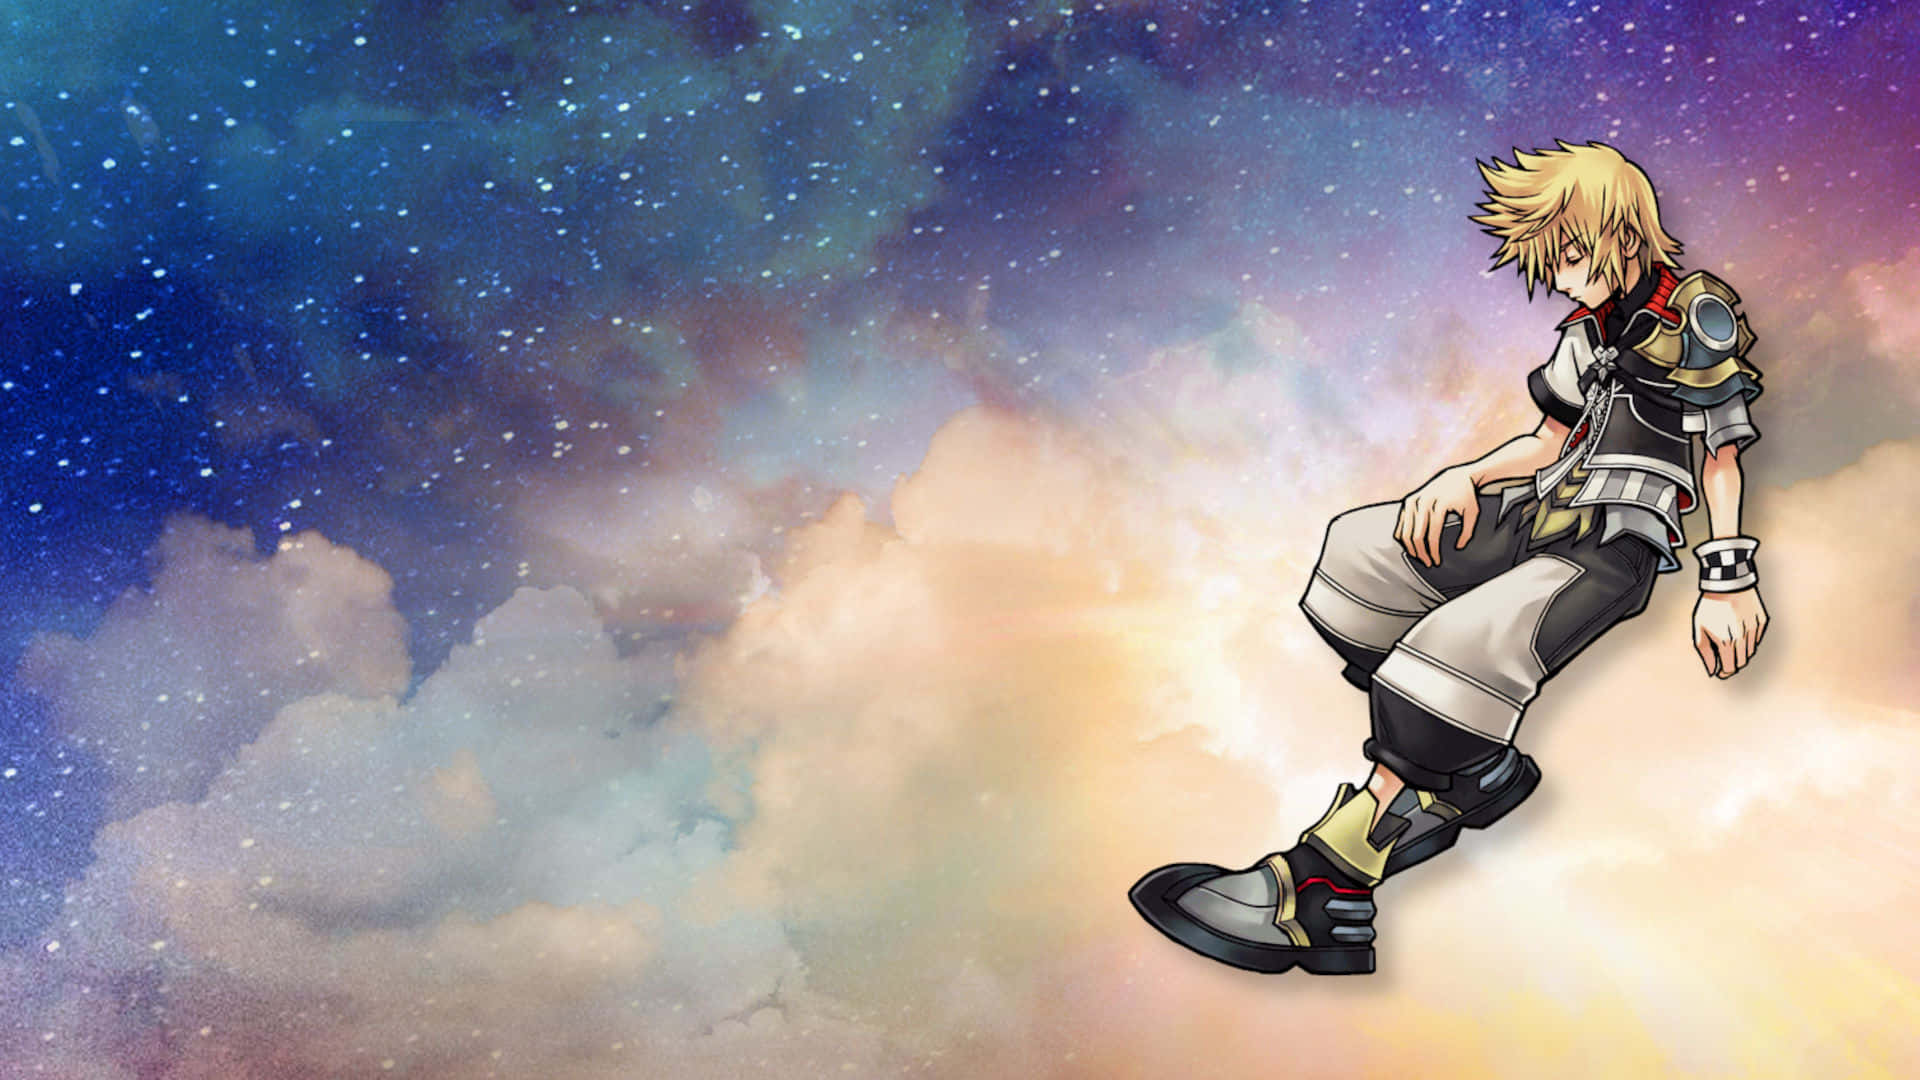 "A Grand Adventure Awaits with Roxas from Kingdom Hearts" Wallpaper